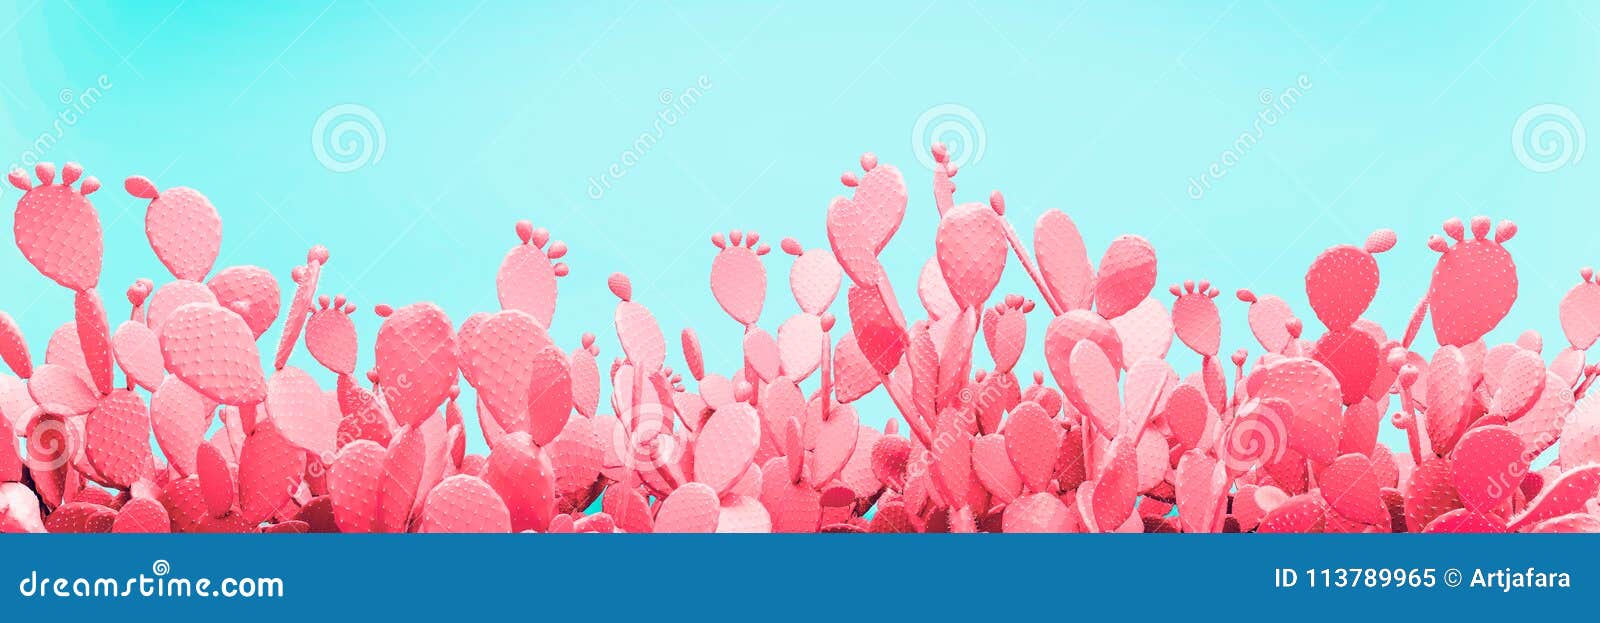 unusual blue cactus field on pink background